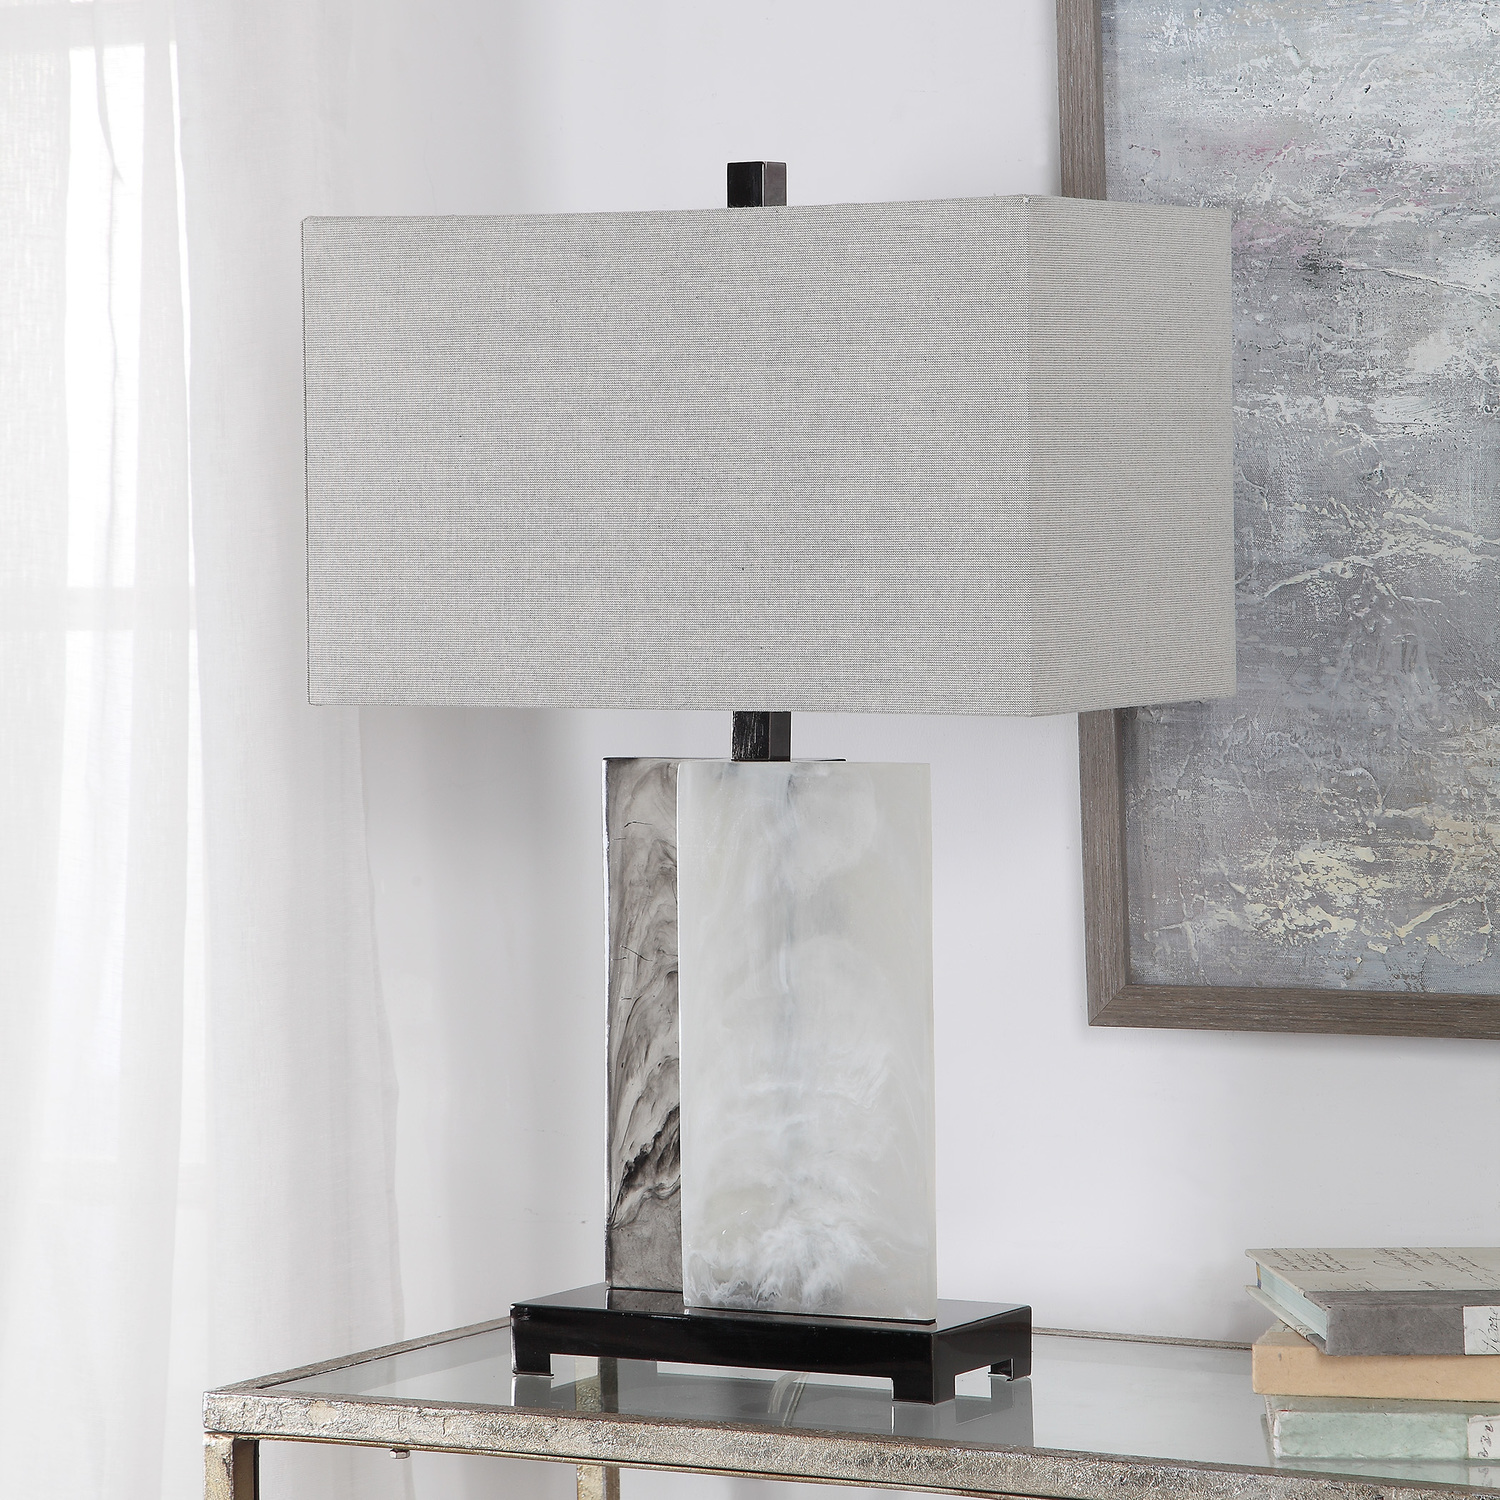 light bulb for bedside table Uttermost Table Lamp This Modern Silhouette Features Two Rectangular Slabs Reminiscent Of Billowing Smoke Fastened In An Off-set Construction Accented With Polished Black Nickel Plated Details.